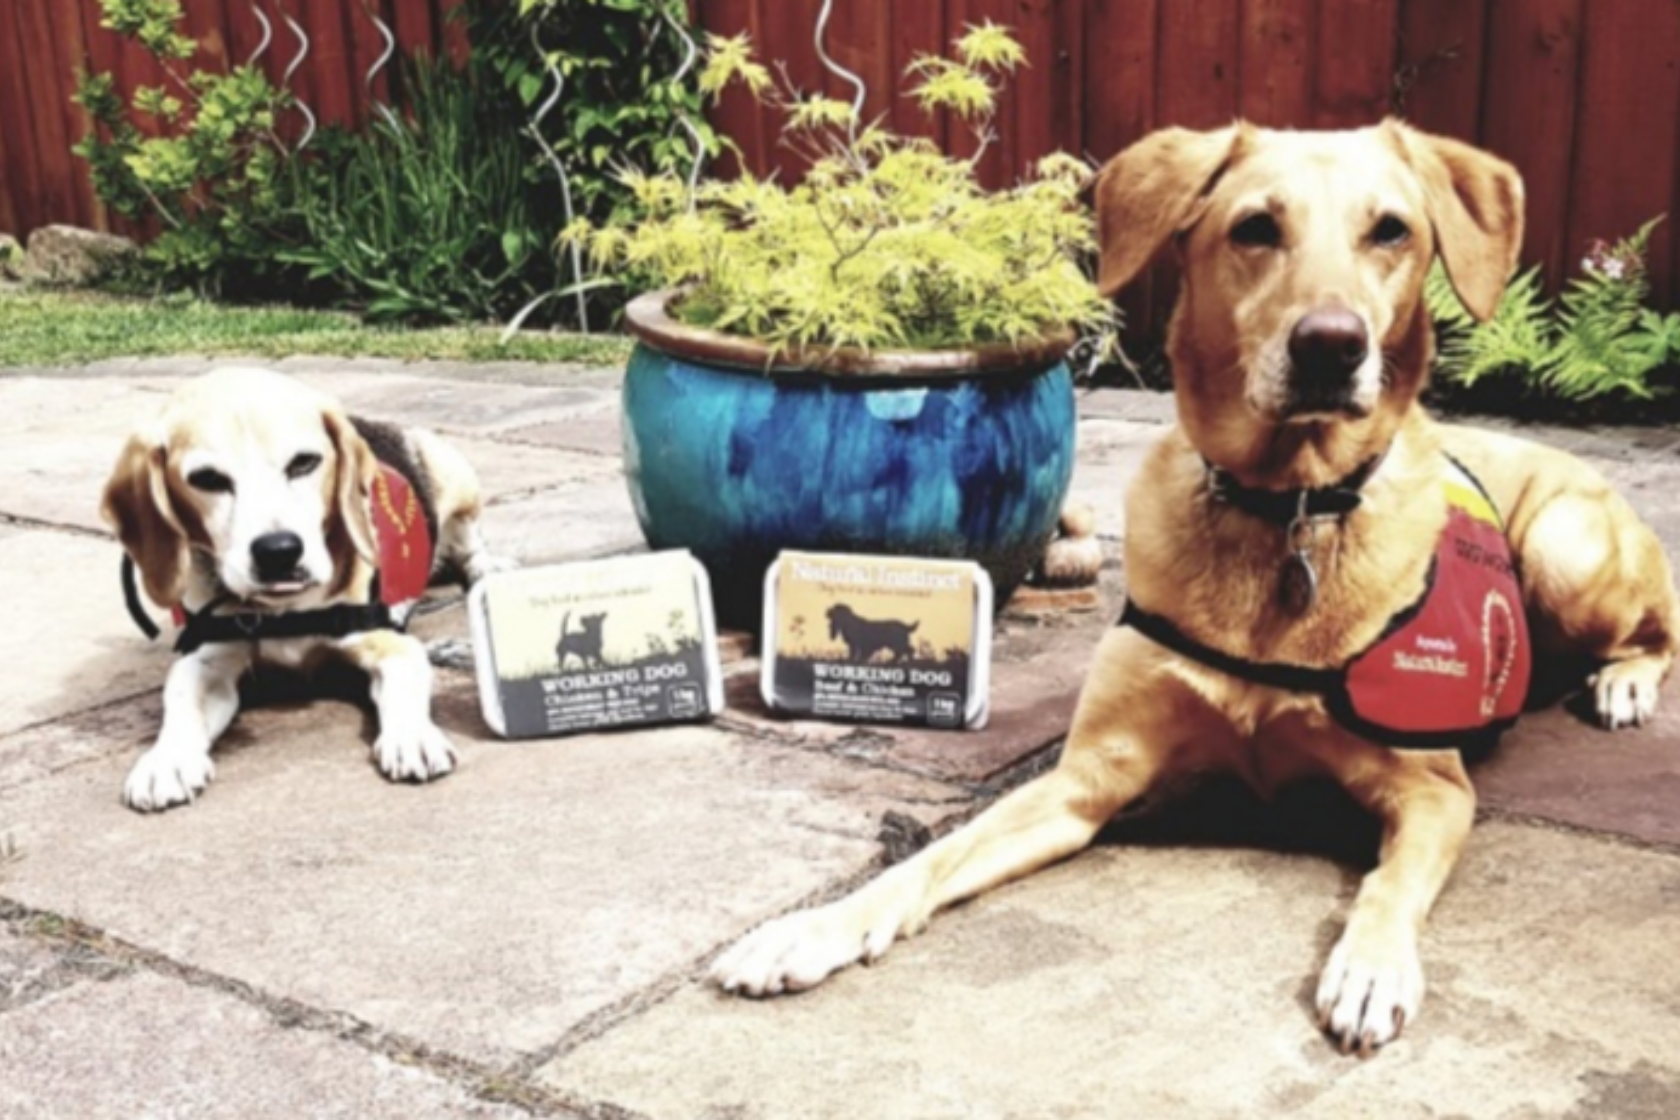 Two dog aid dogs sat together with some Natural Instinct dog food